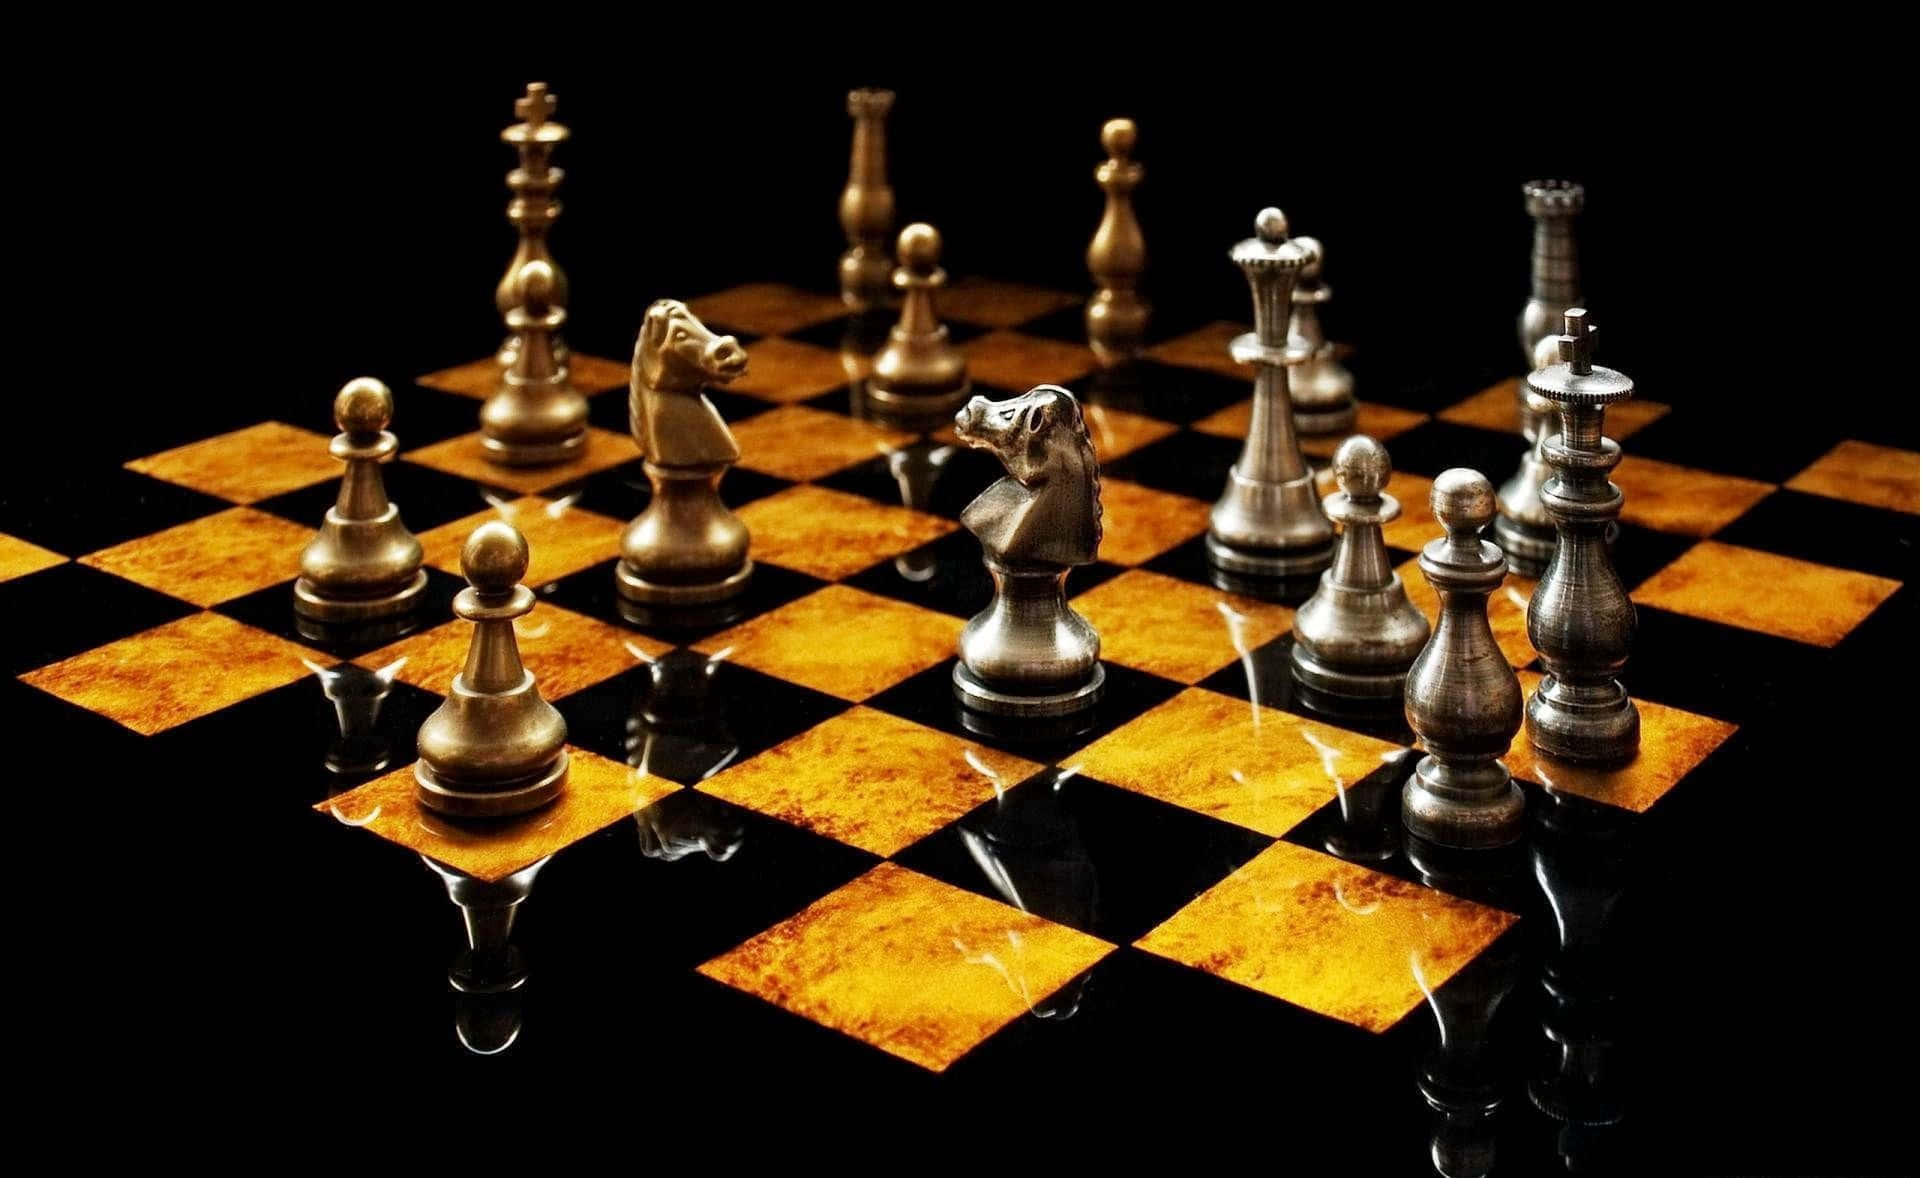 A game of strategy and wits - Chess